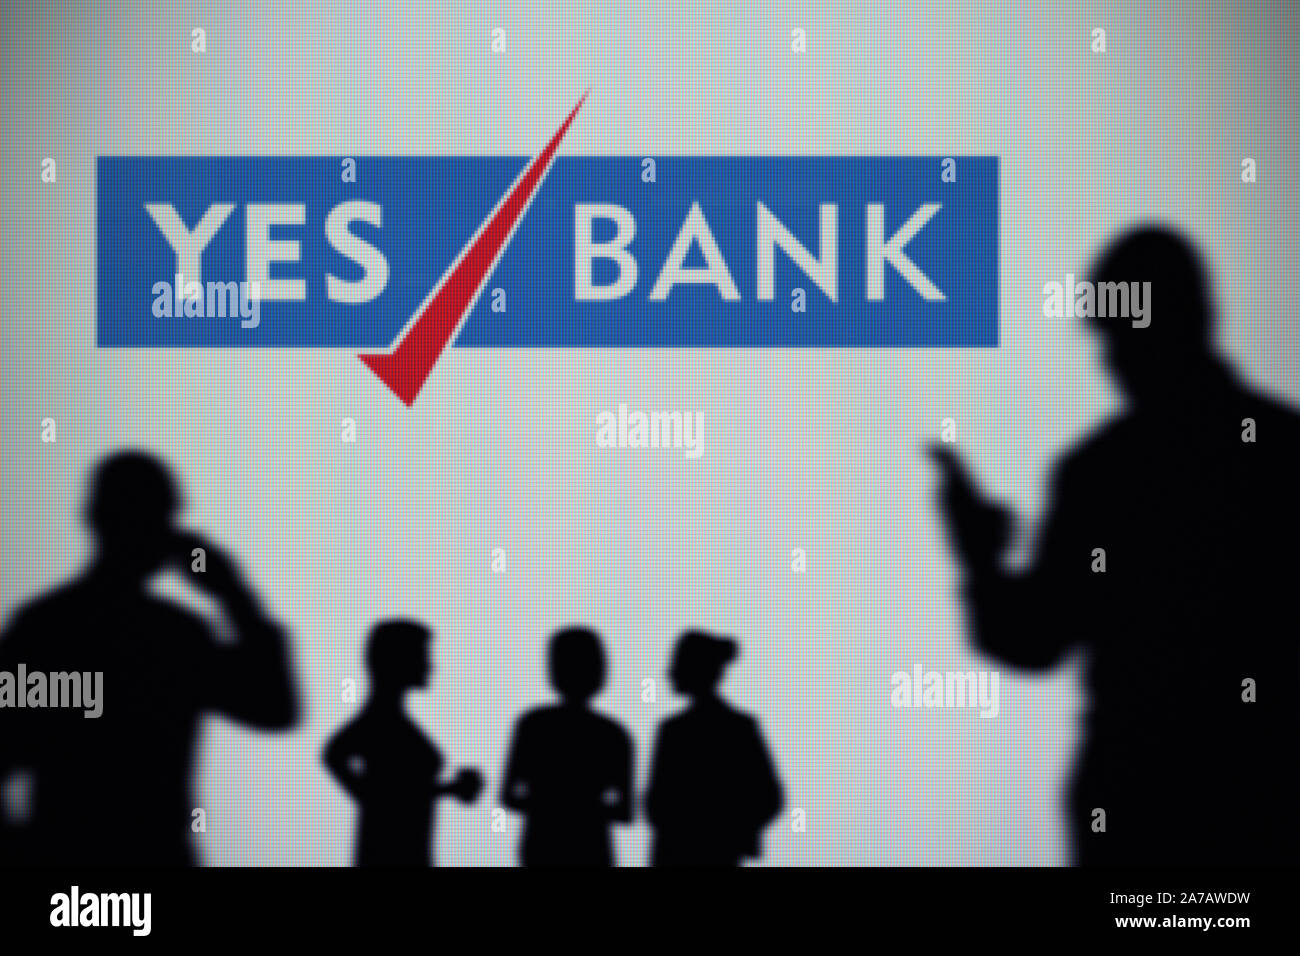 The Yes Bank logo is seen on an LED screen in the background while a silhouetted person uses a smartphone (Editorial use only) Stock Photo